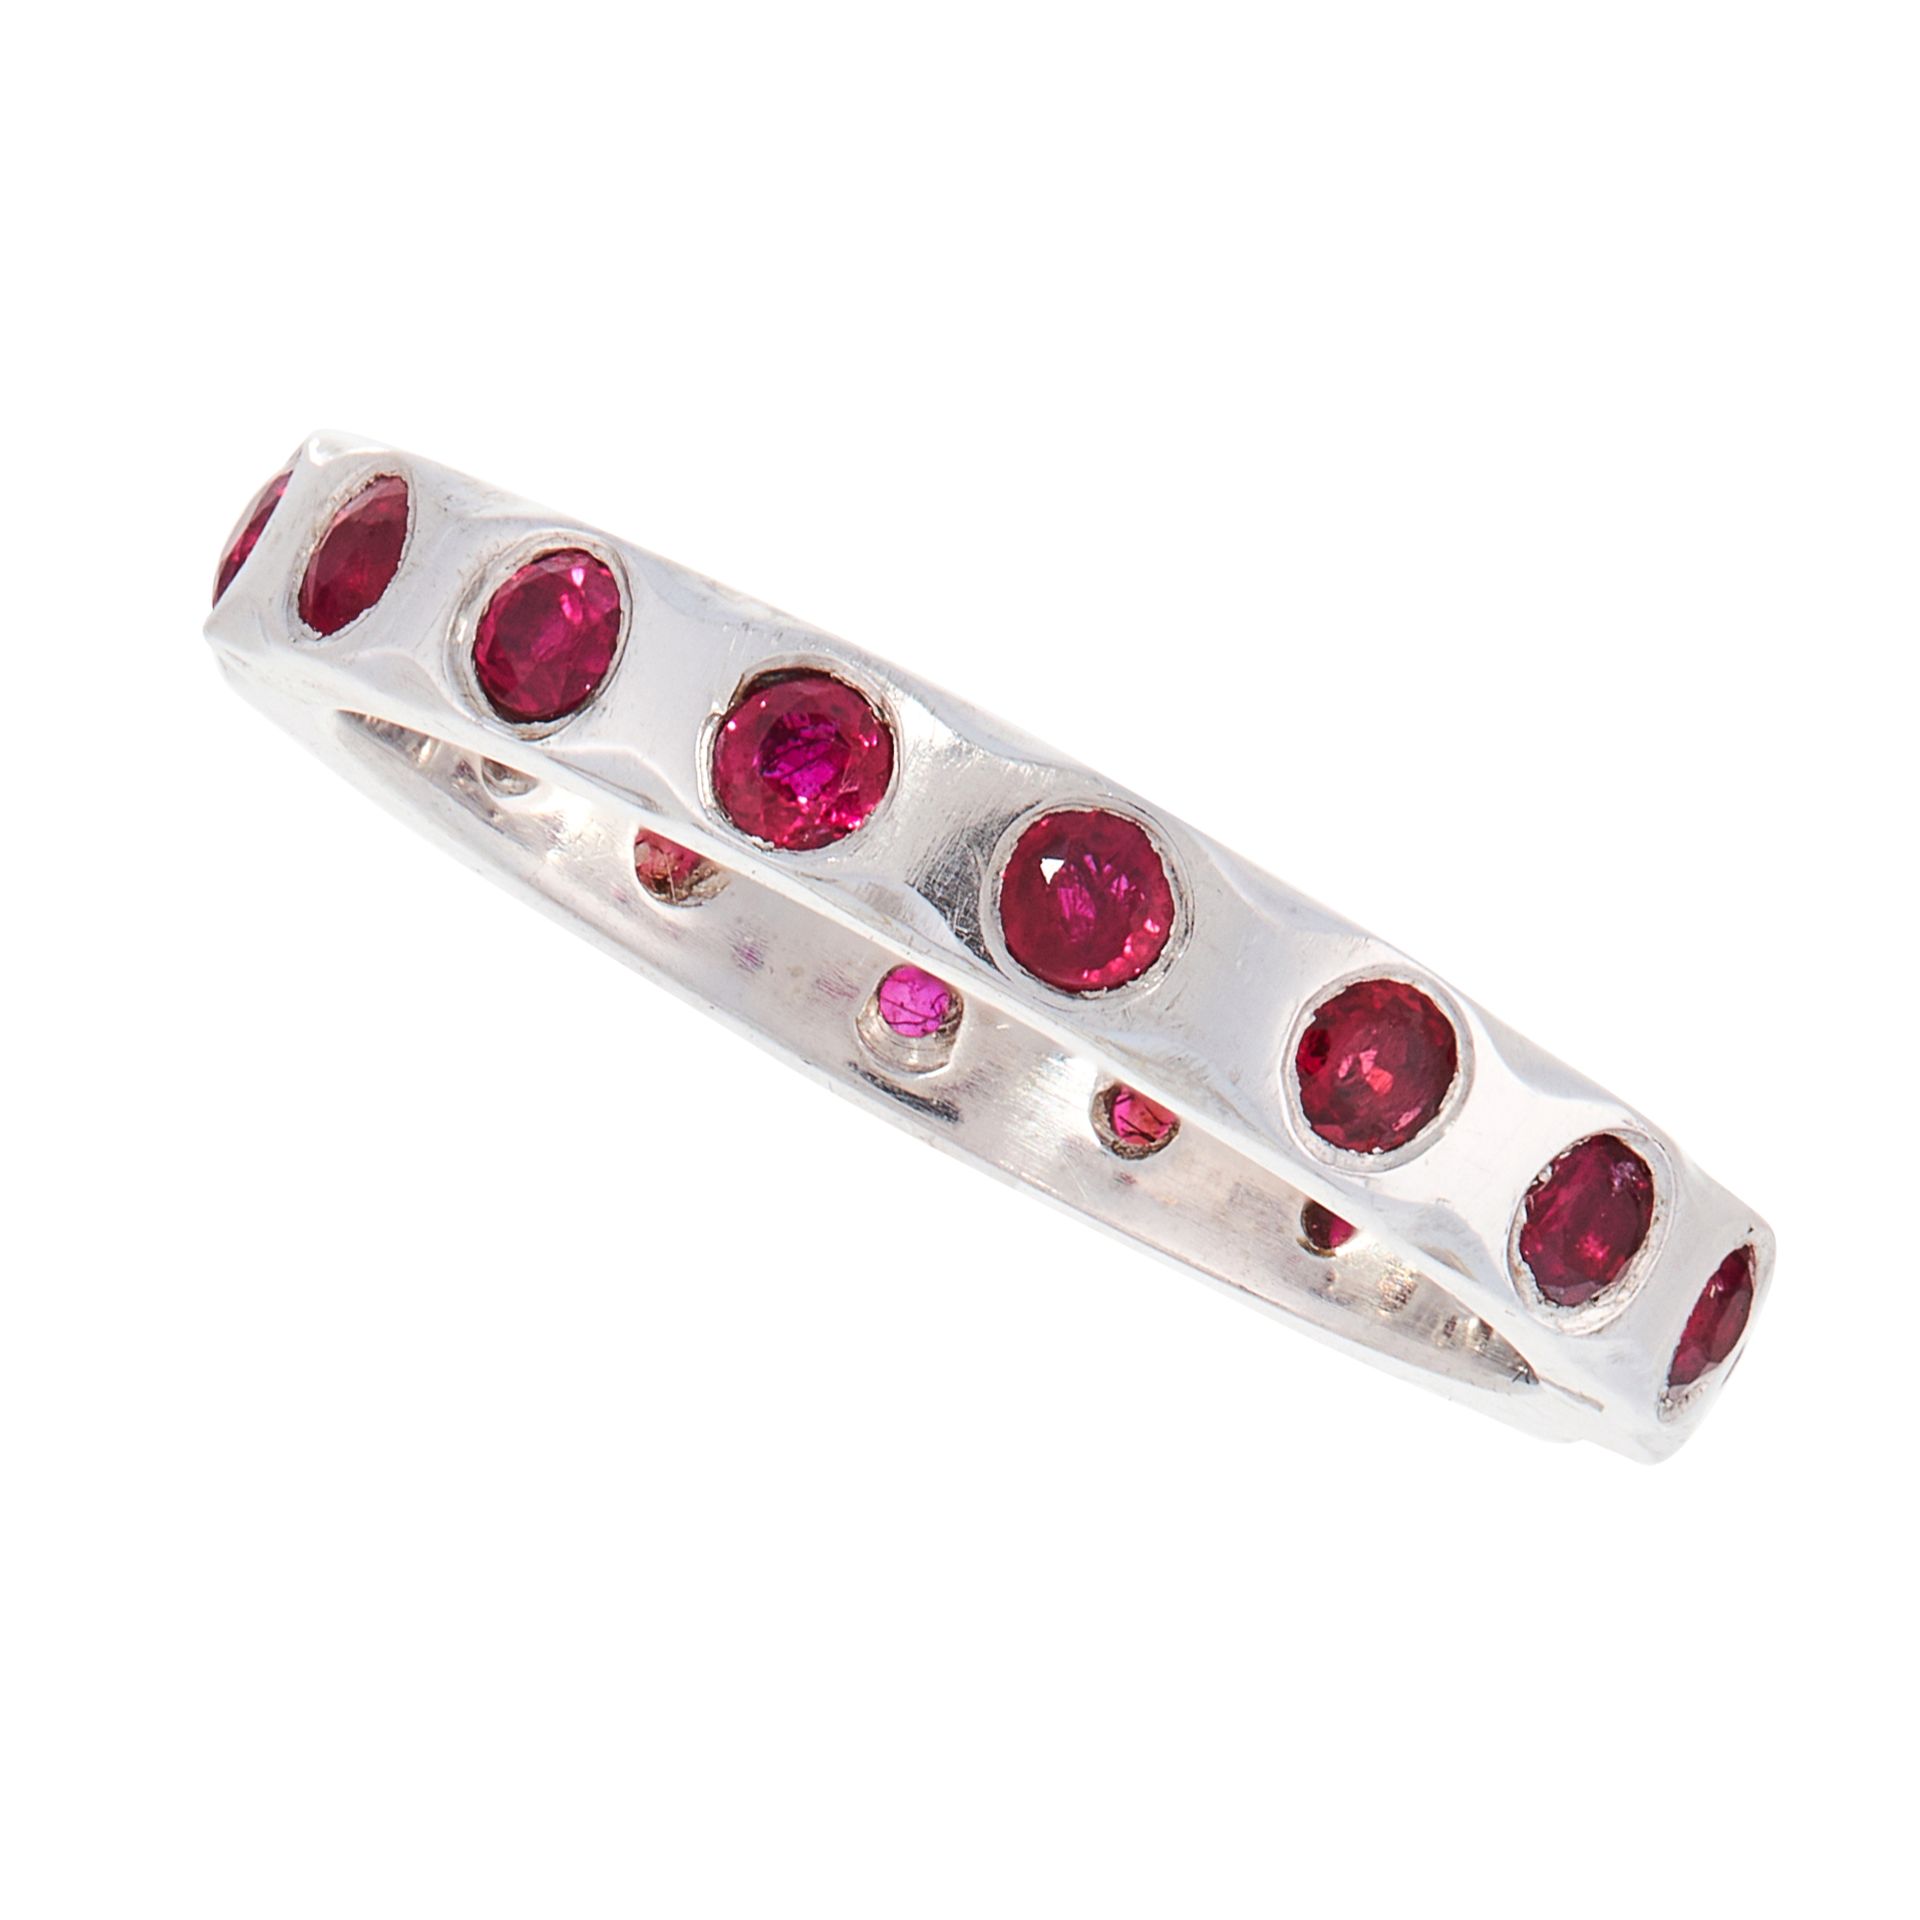 A RUBY ETERNITY BAND RING, 1938 in platinum, the stylised band set with round cut rubies, full